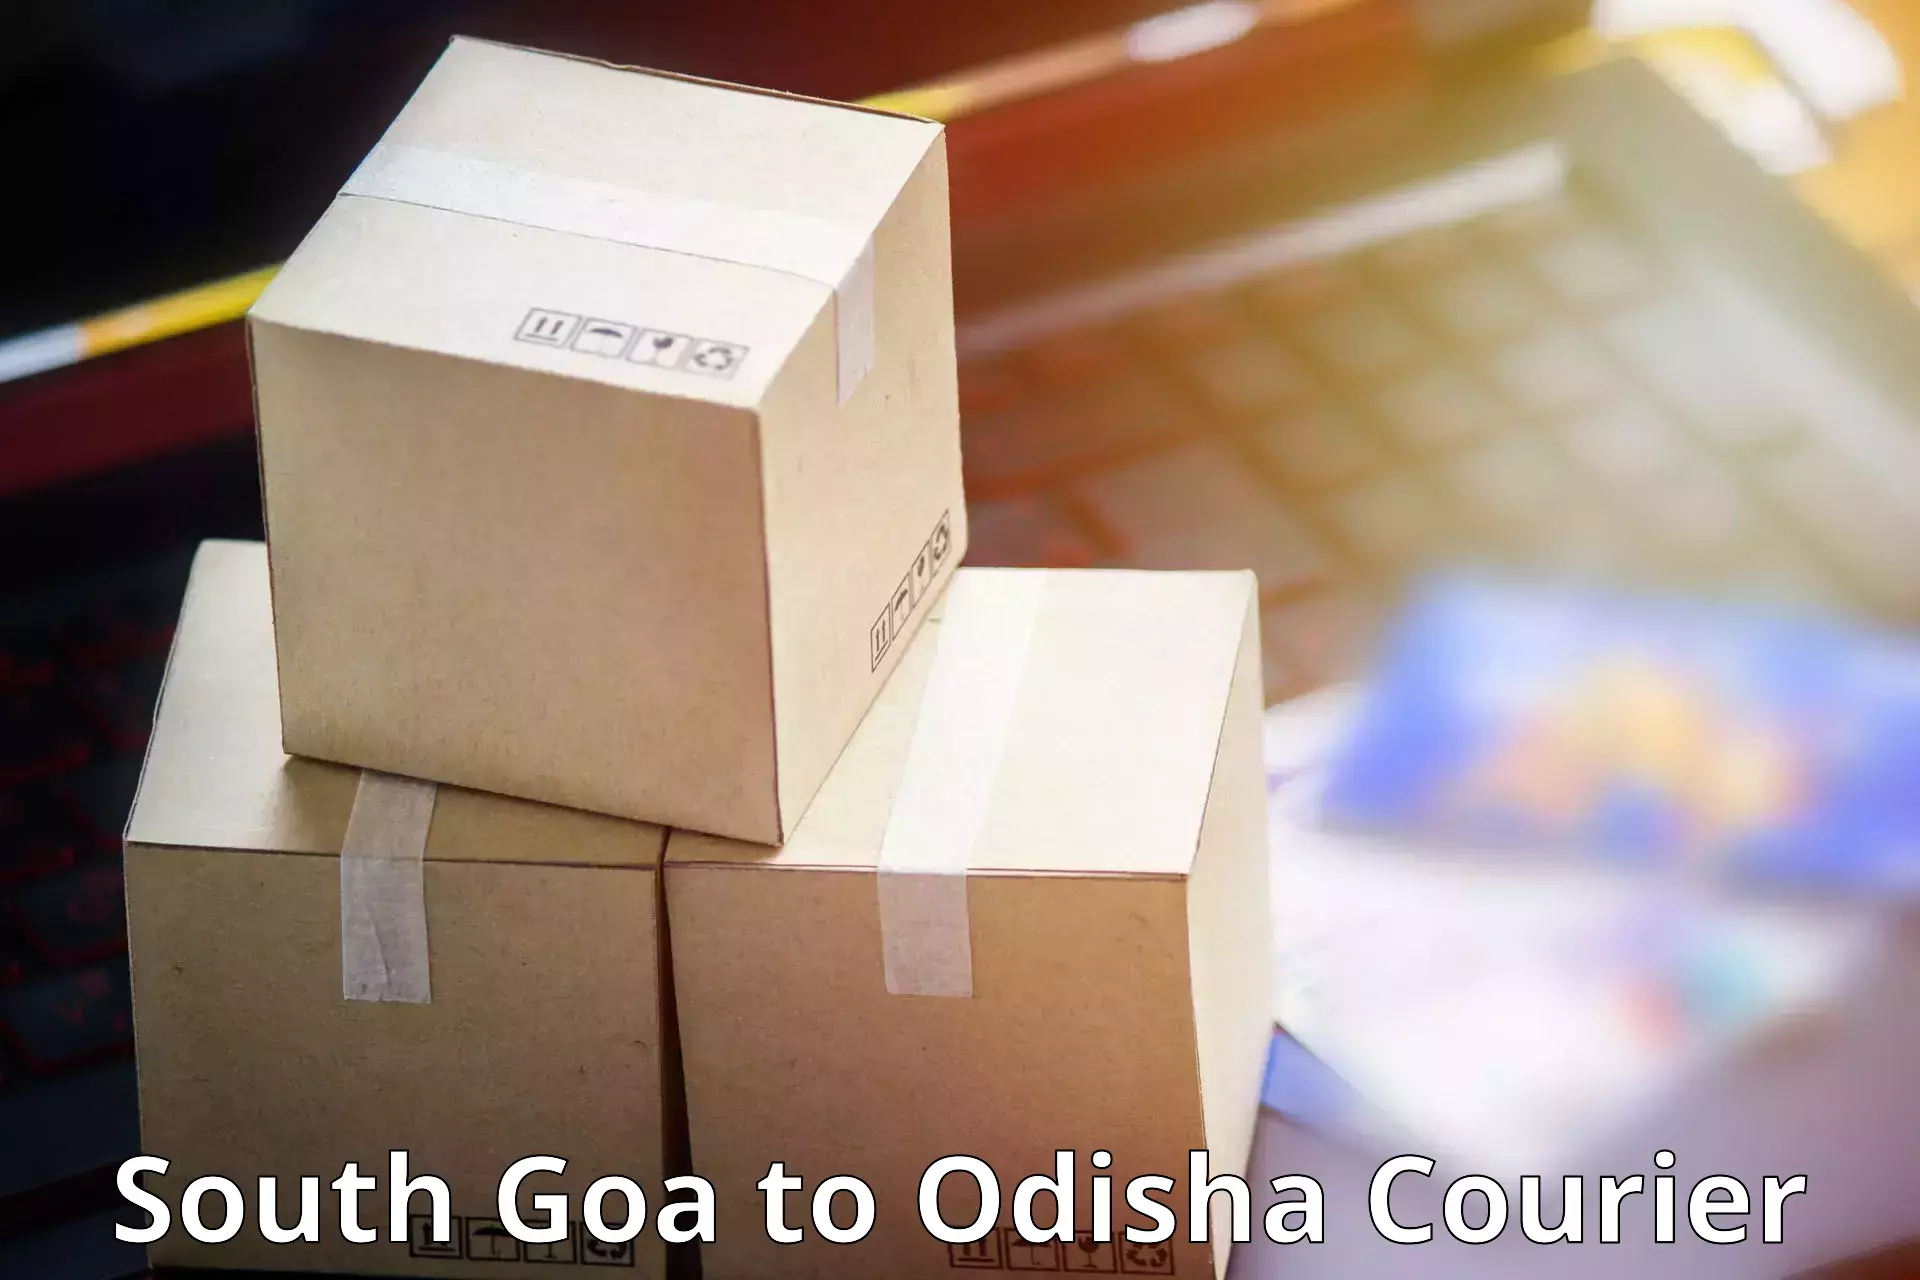 Automated parcel services South Goa to Pipili